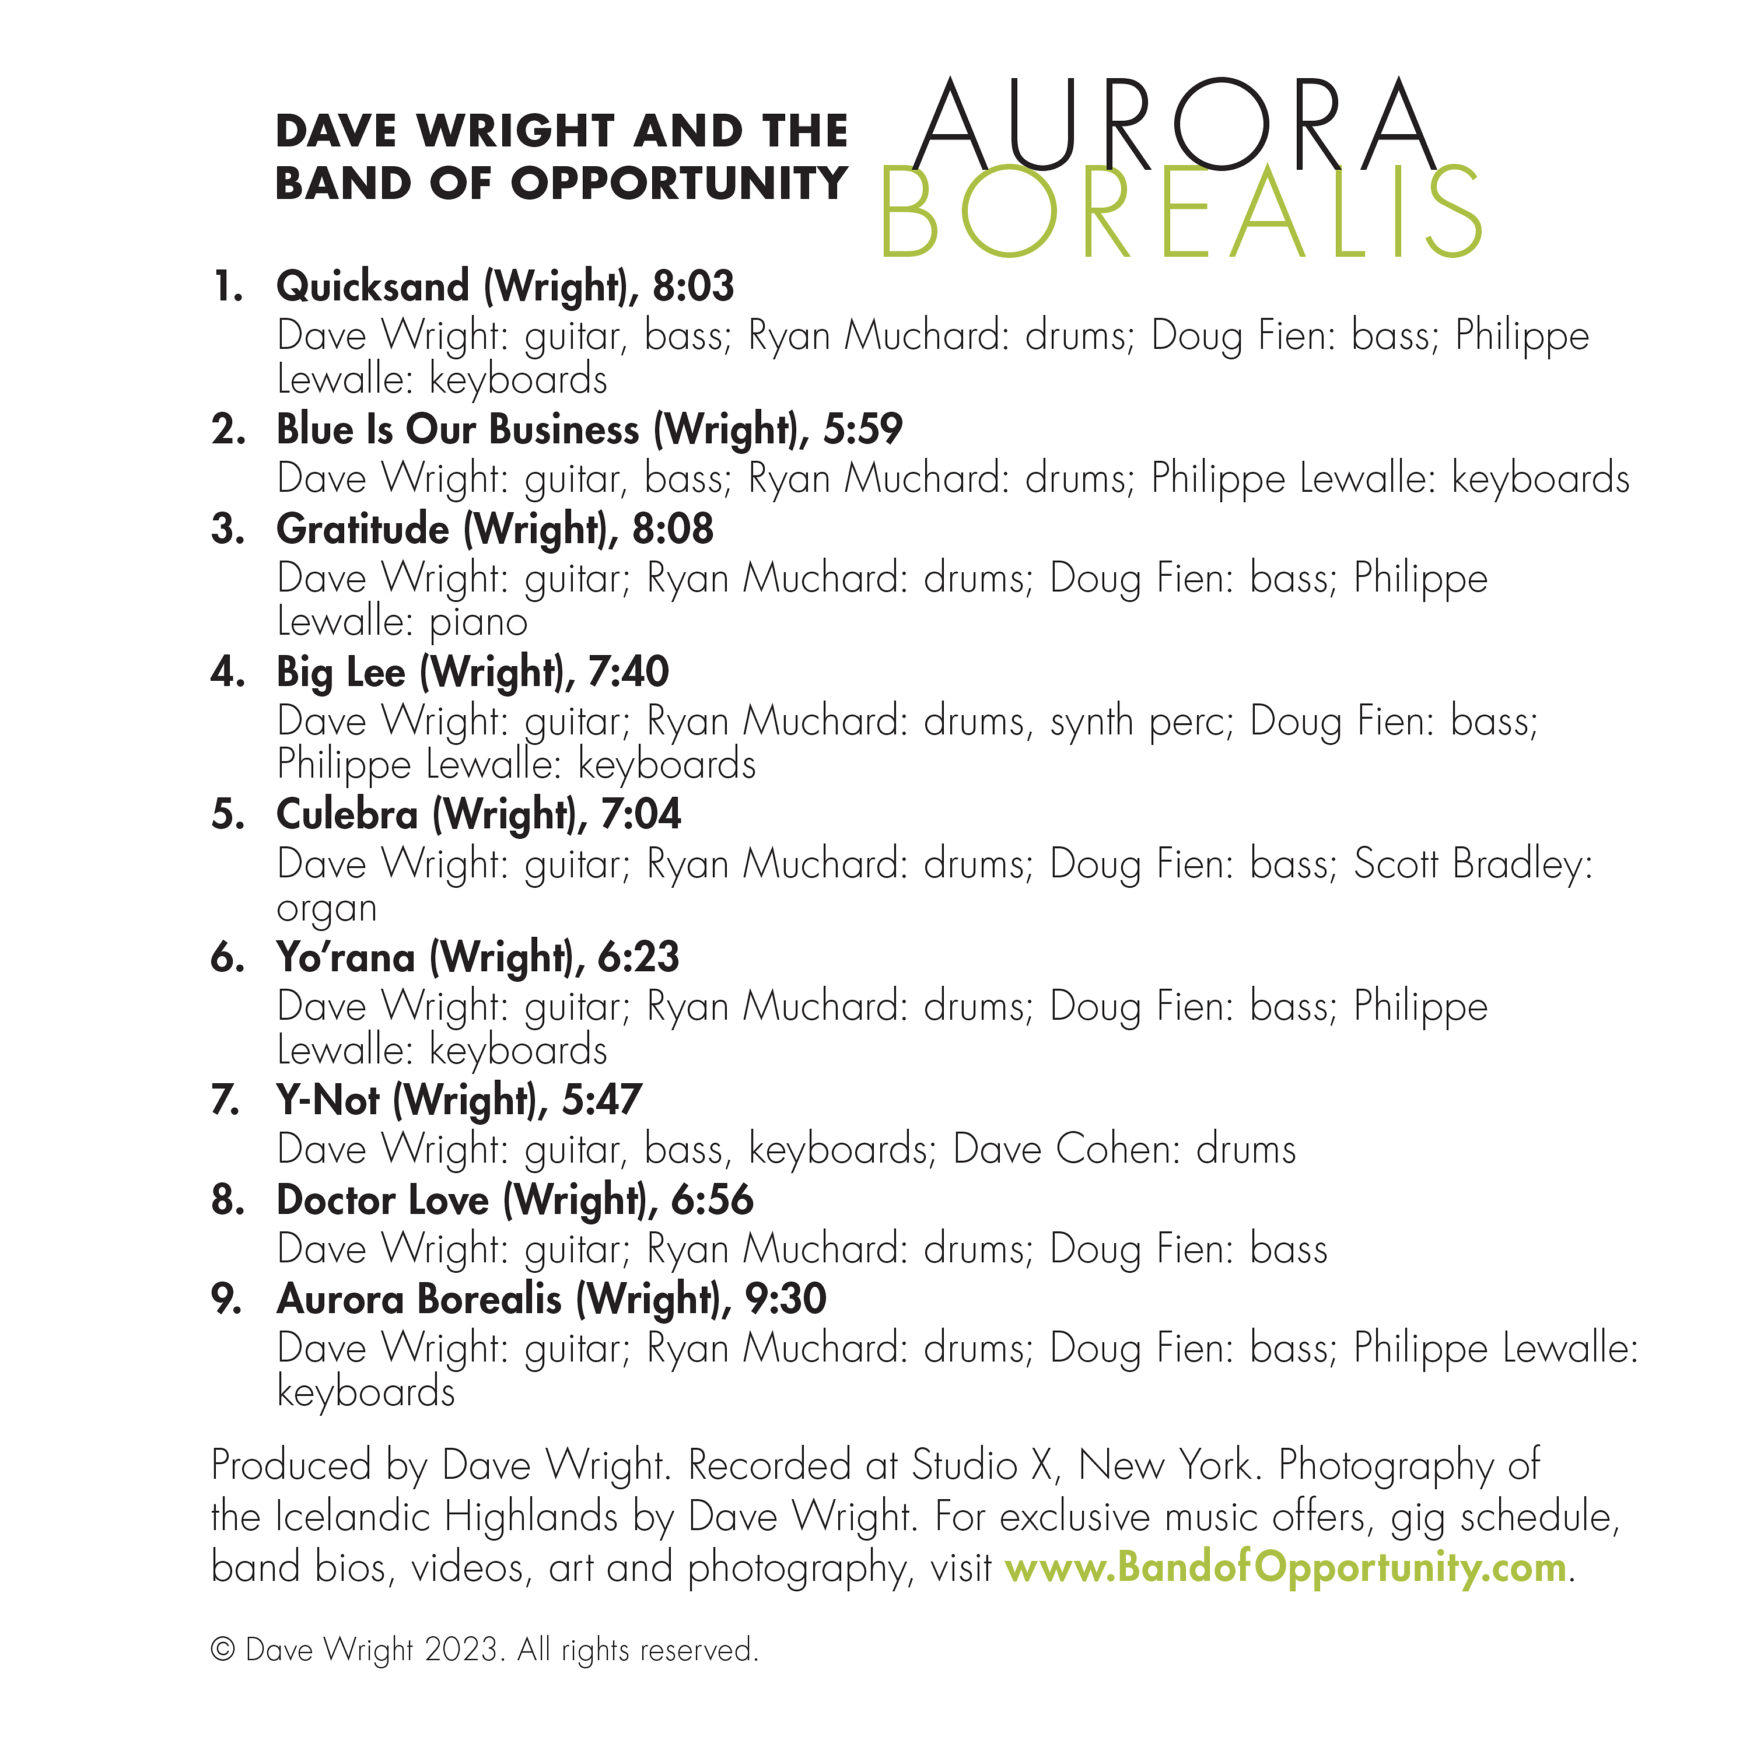 Dave Wright and The Band Of Opportunity: Aurora Borealis album liner notes